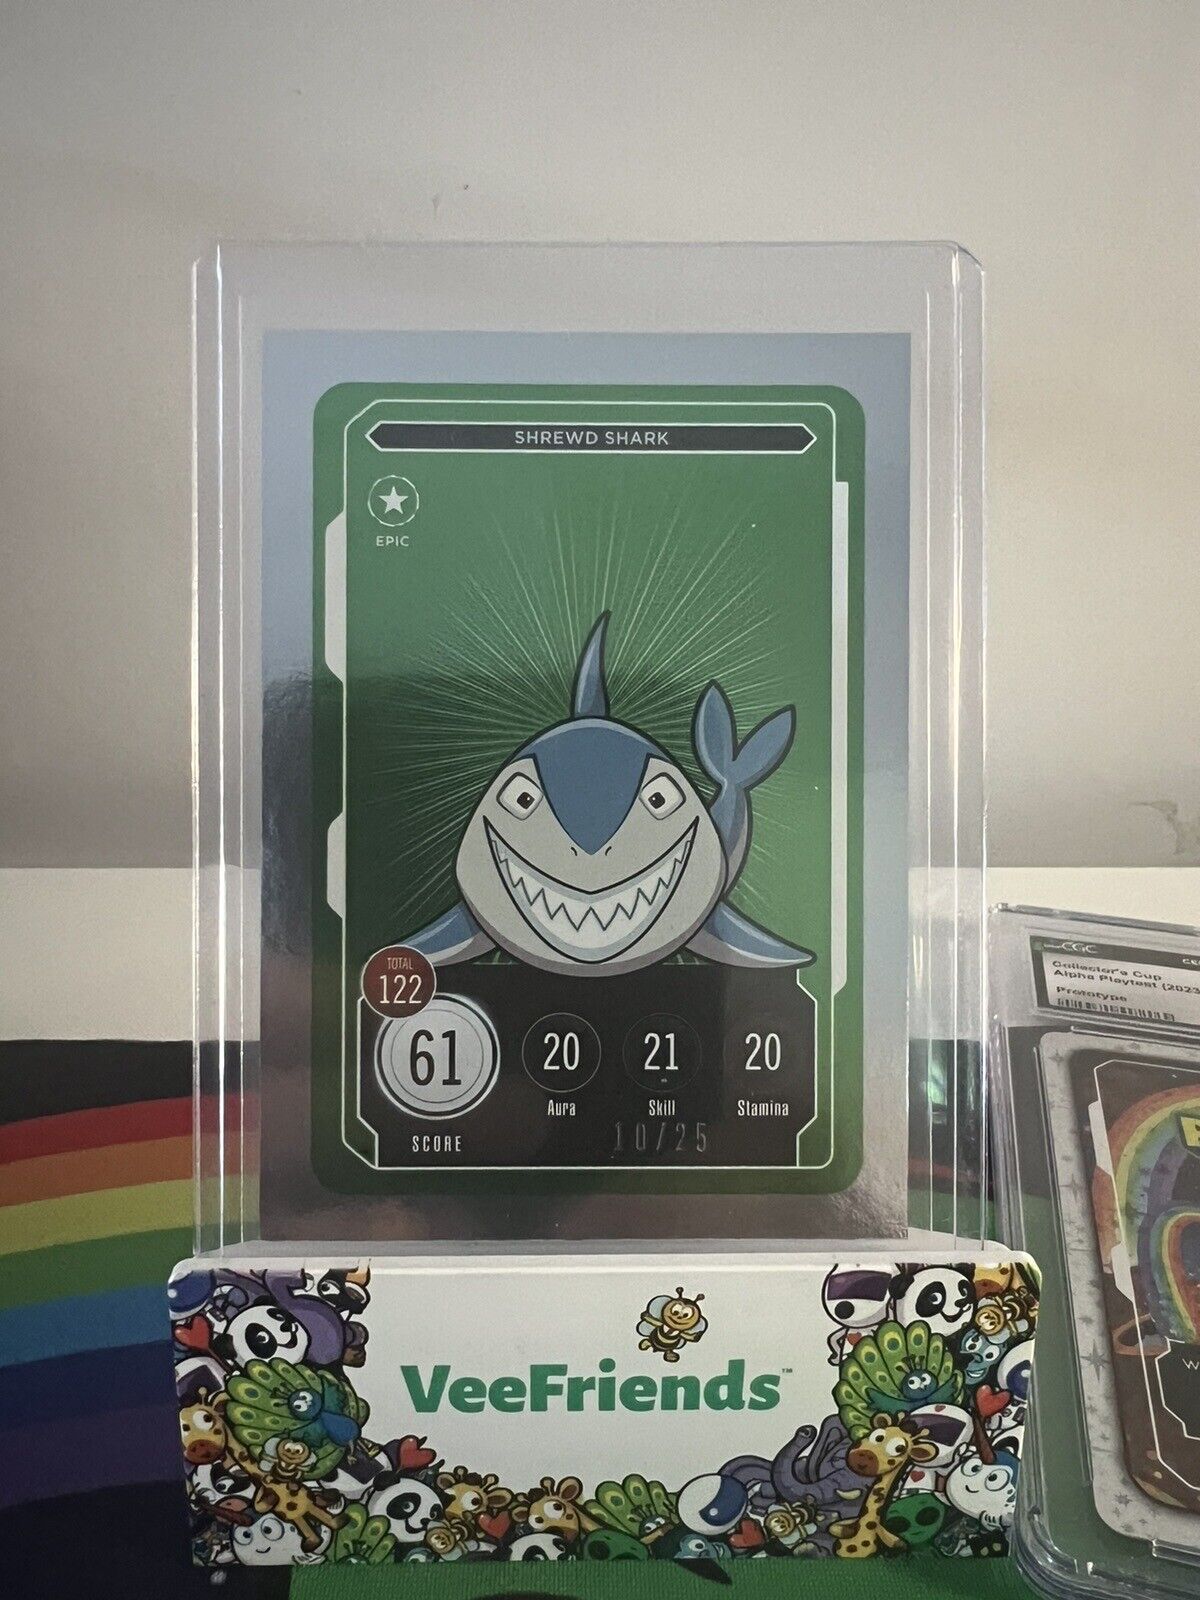 SHREWD SHARK VeeFriends Series 2 Compete and Collect EPIC Card Gary Vee